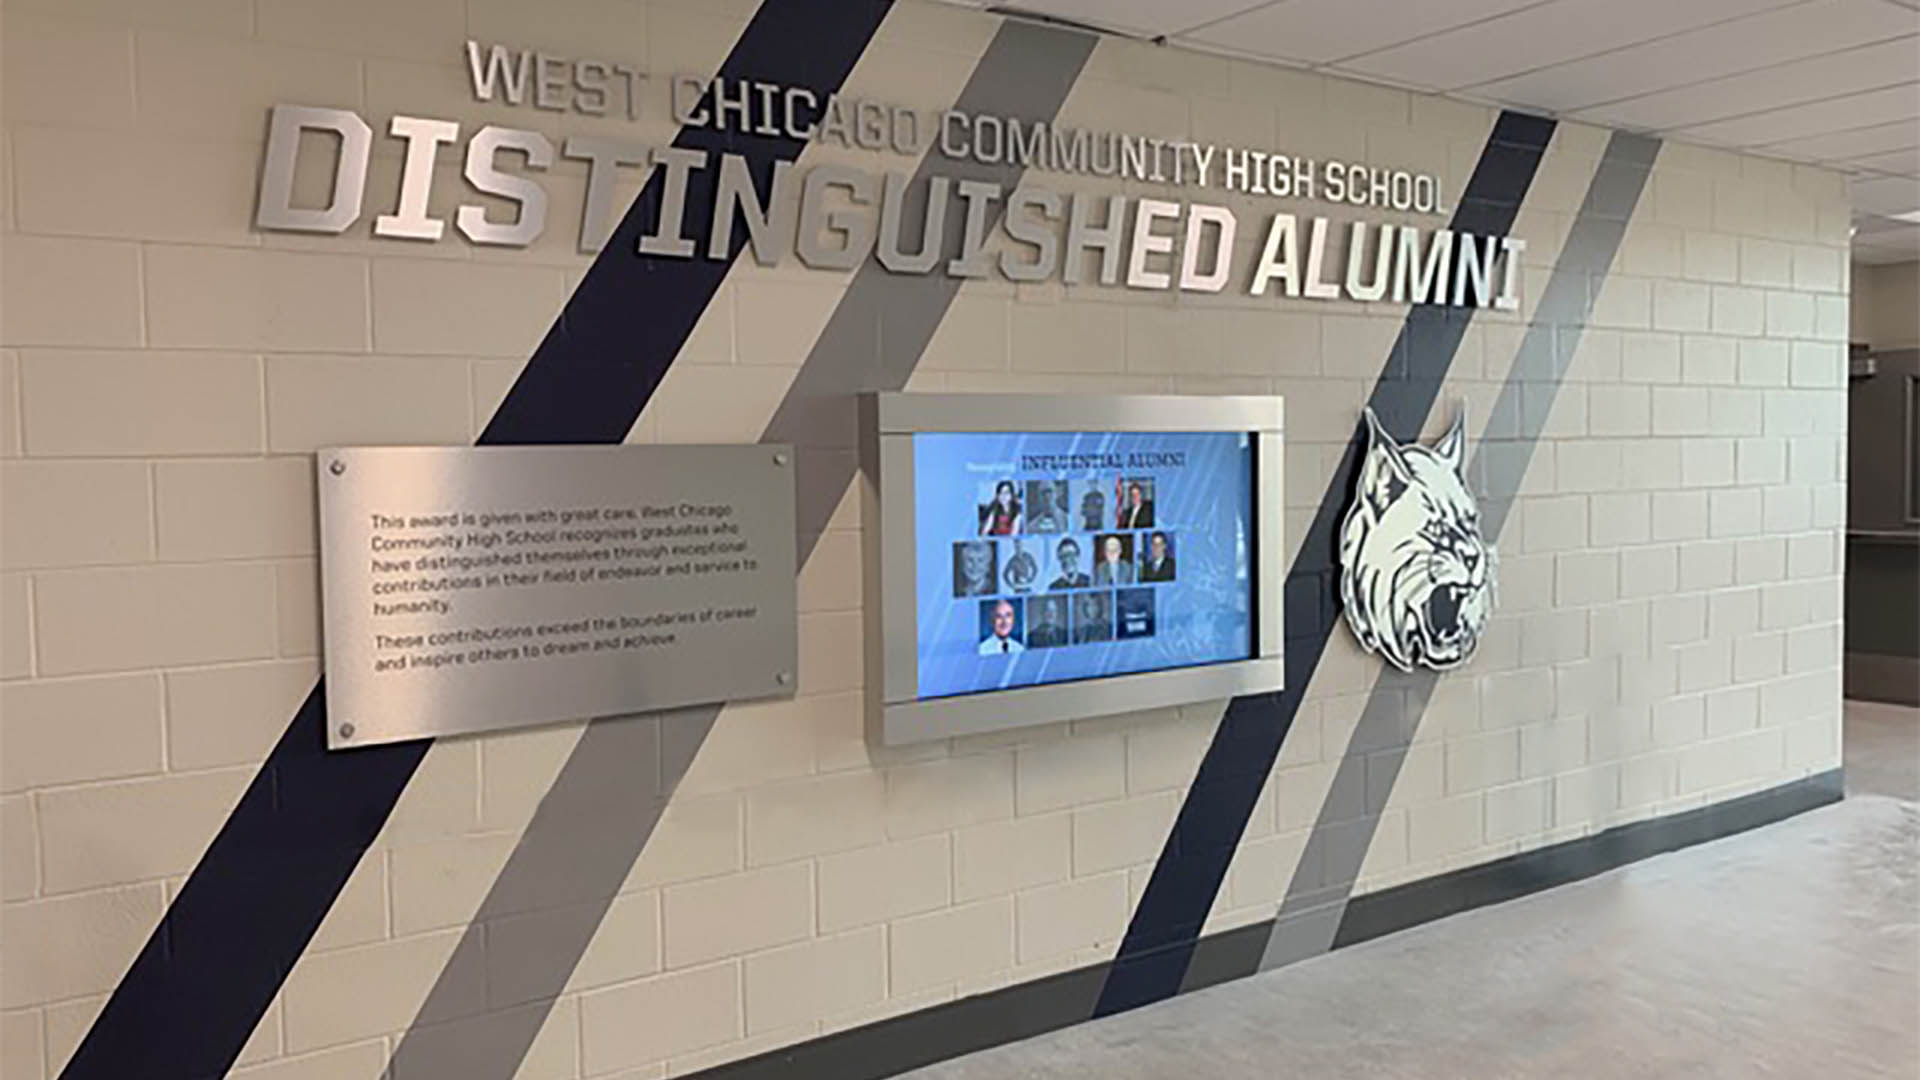 Recognizes distinguished alumni at a high school.  The touch screen display shows Alumni with a photo and bio about each.